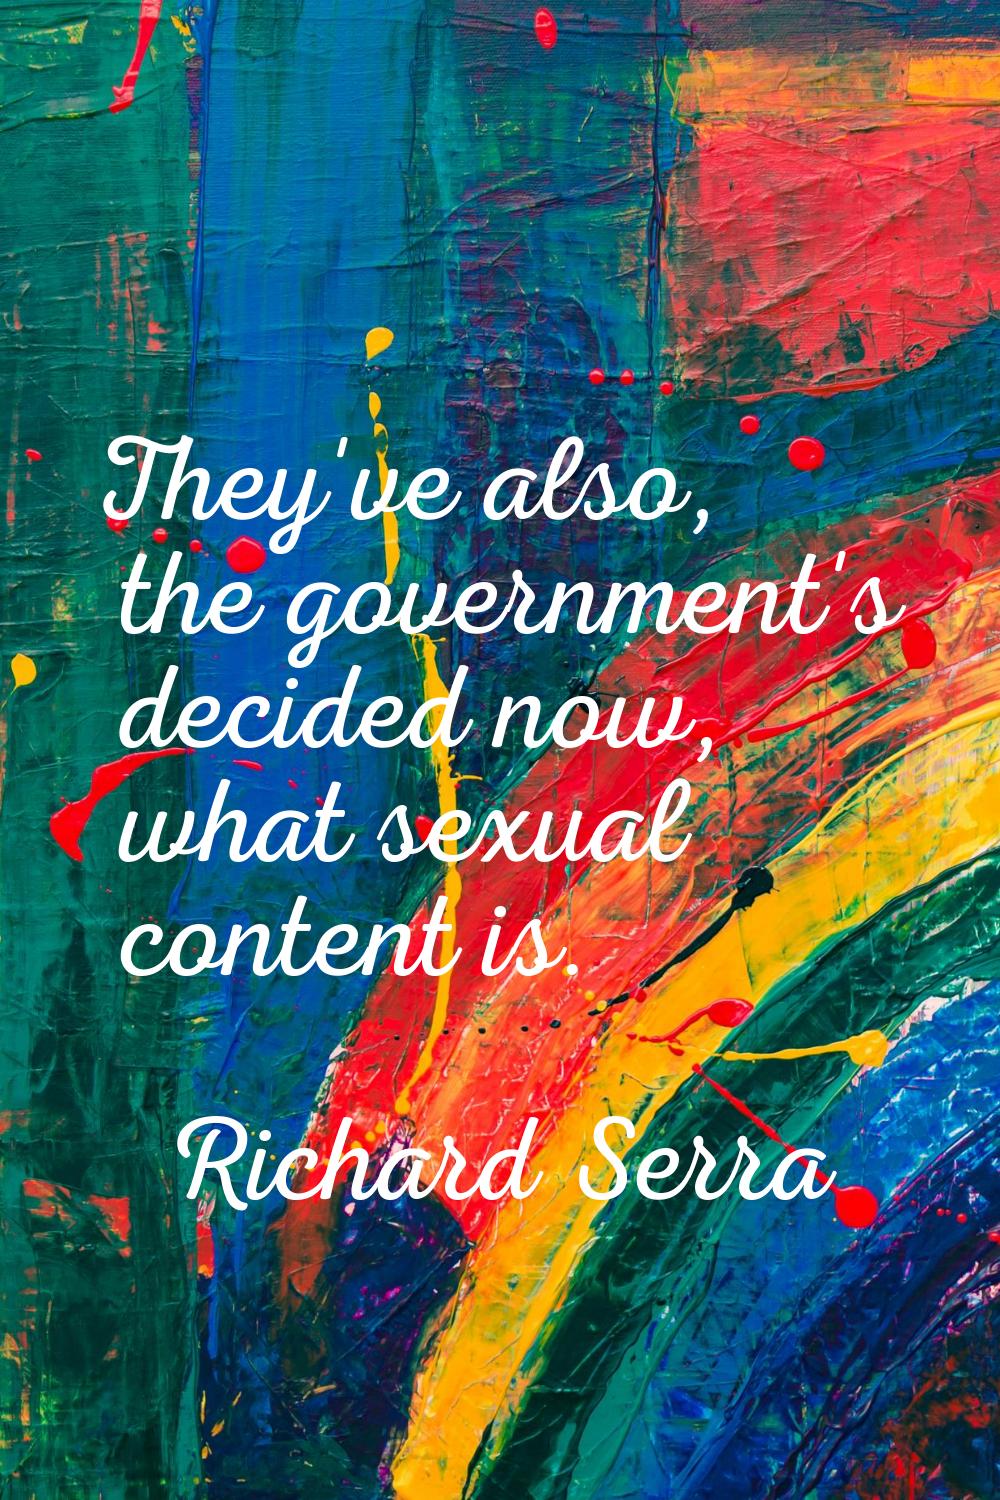 They've also, the government's decided now, what sexual content is.